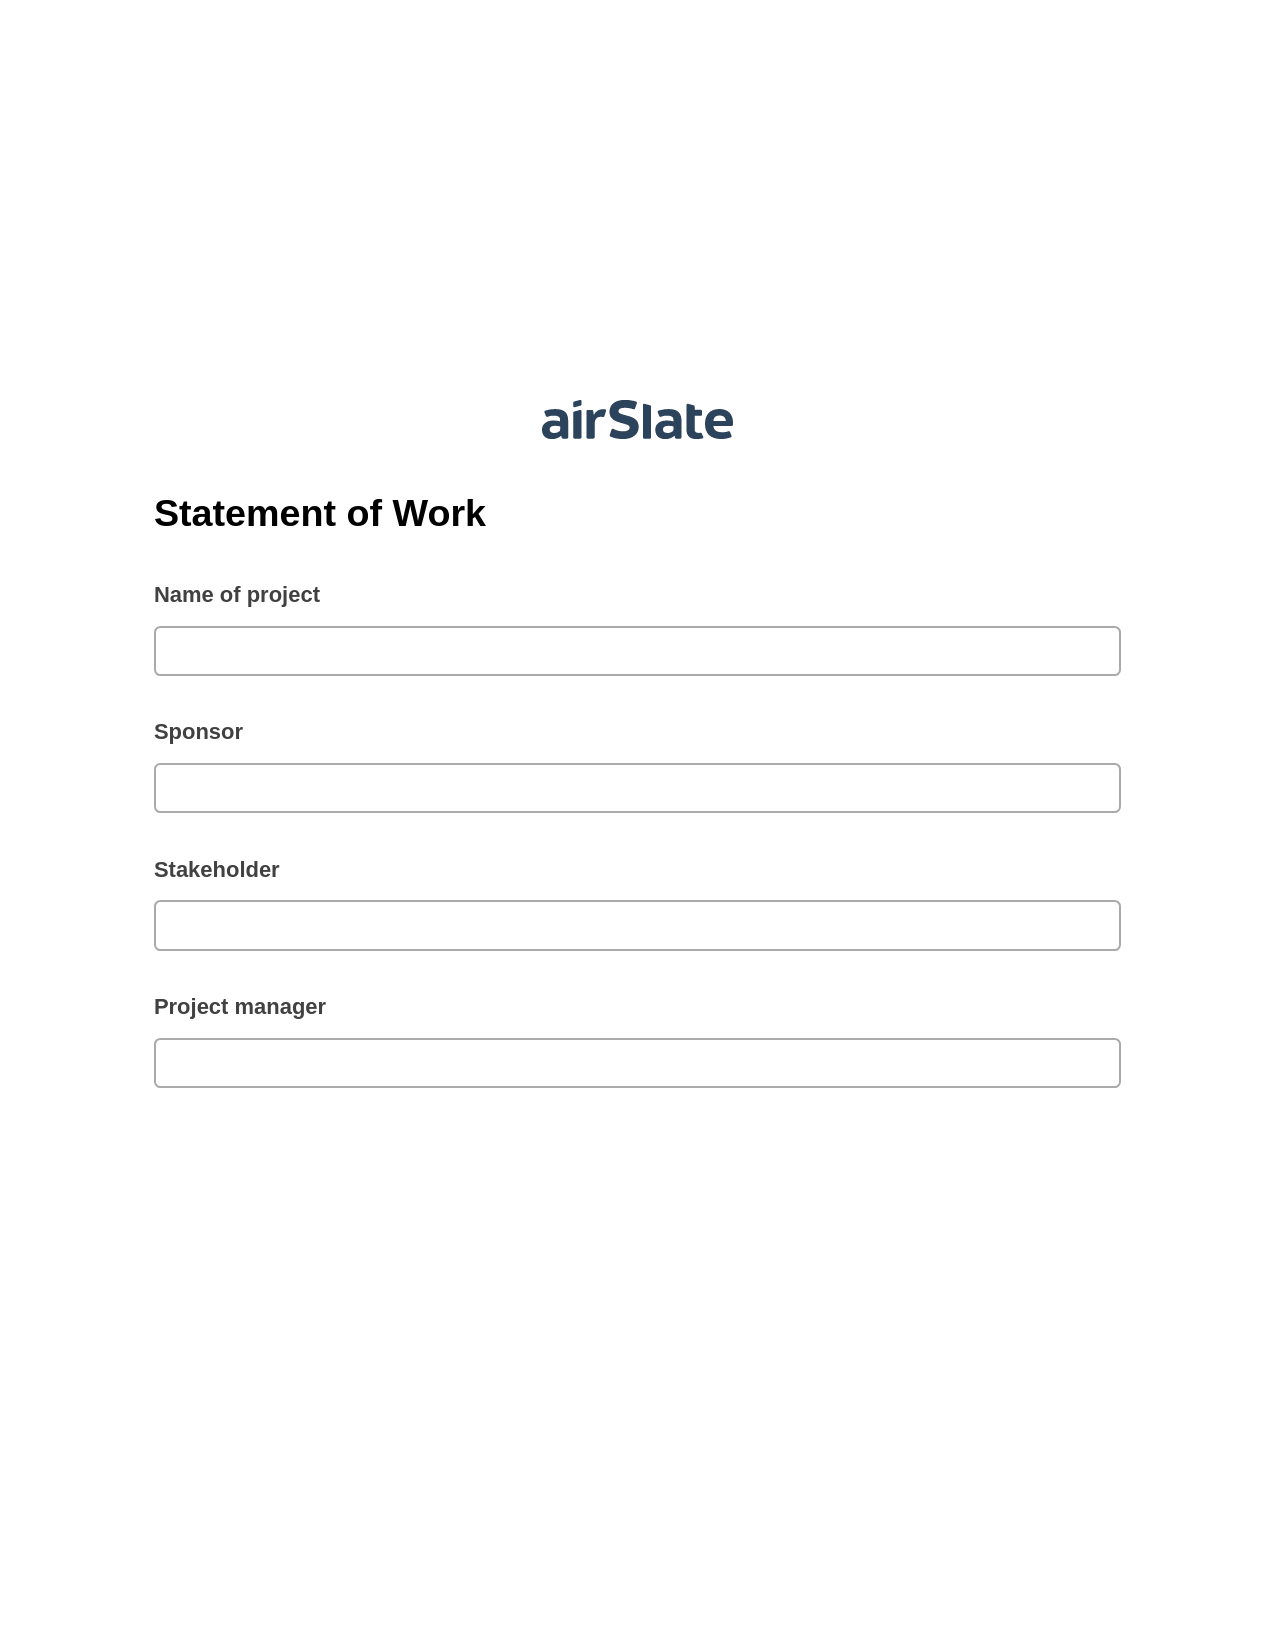 Statement of Work Pre-fill from Salesforce Record Bot, Slack Notification Bot, Post-finish Document Bot